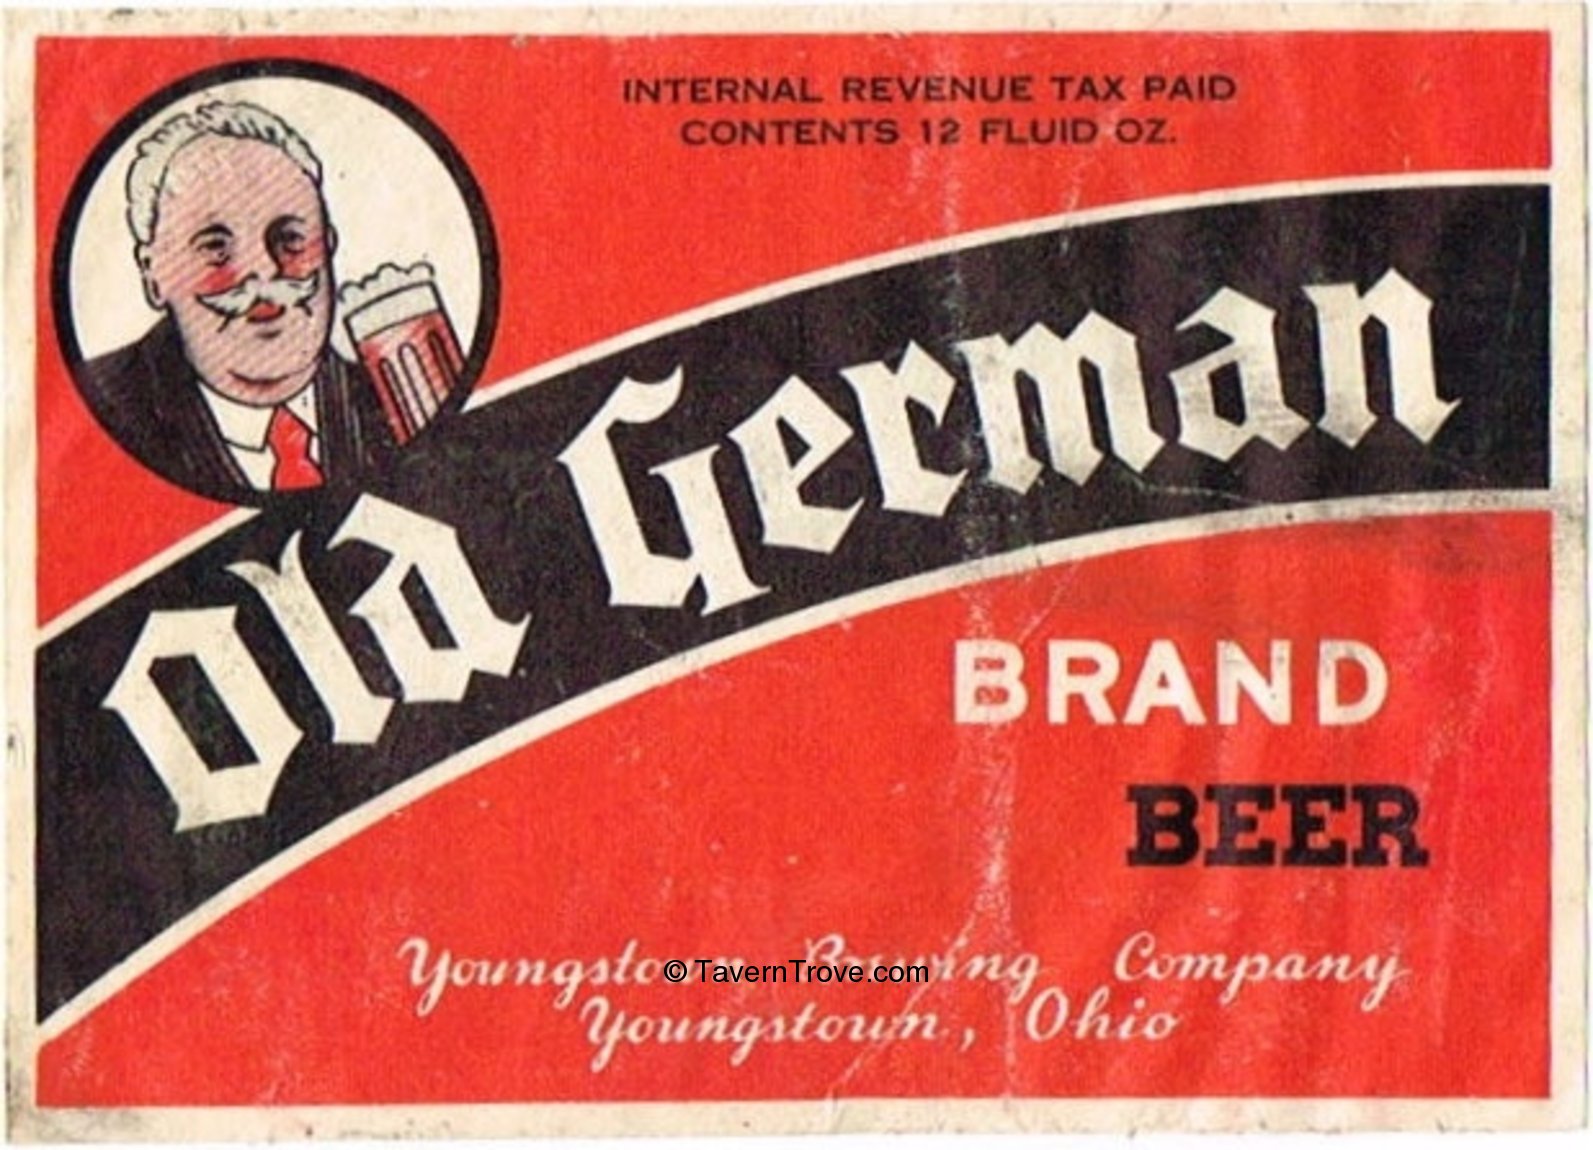 https://www.taverntrove.com/imagecache/old-german-brand-beer-labels-youngstown-brewing-company_66387-1.jpg_H1594.jpg